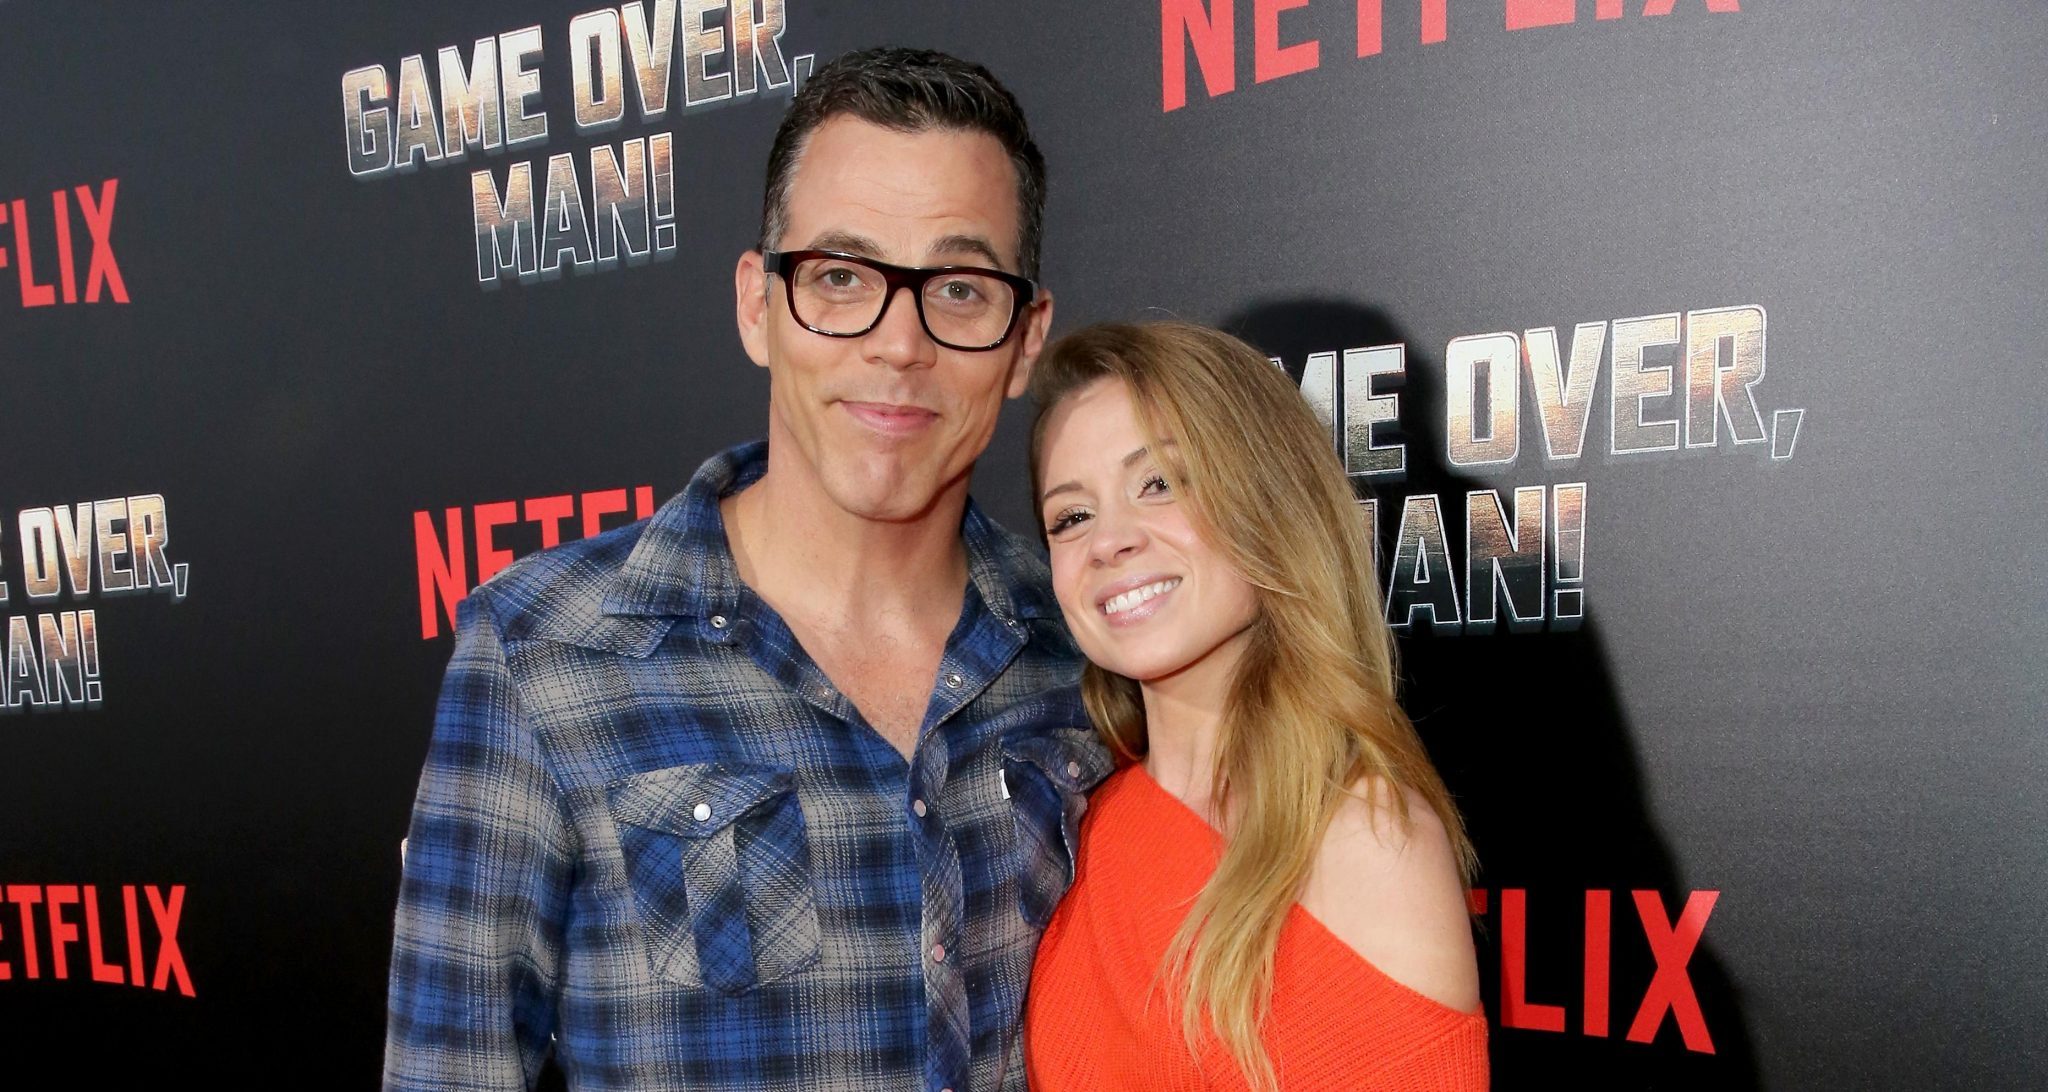 steve-o-l-and-lux-wright-attend-the-premiere-of-the-netflix-film-game-over-man-at-the-regency-village-westwood-4223750